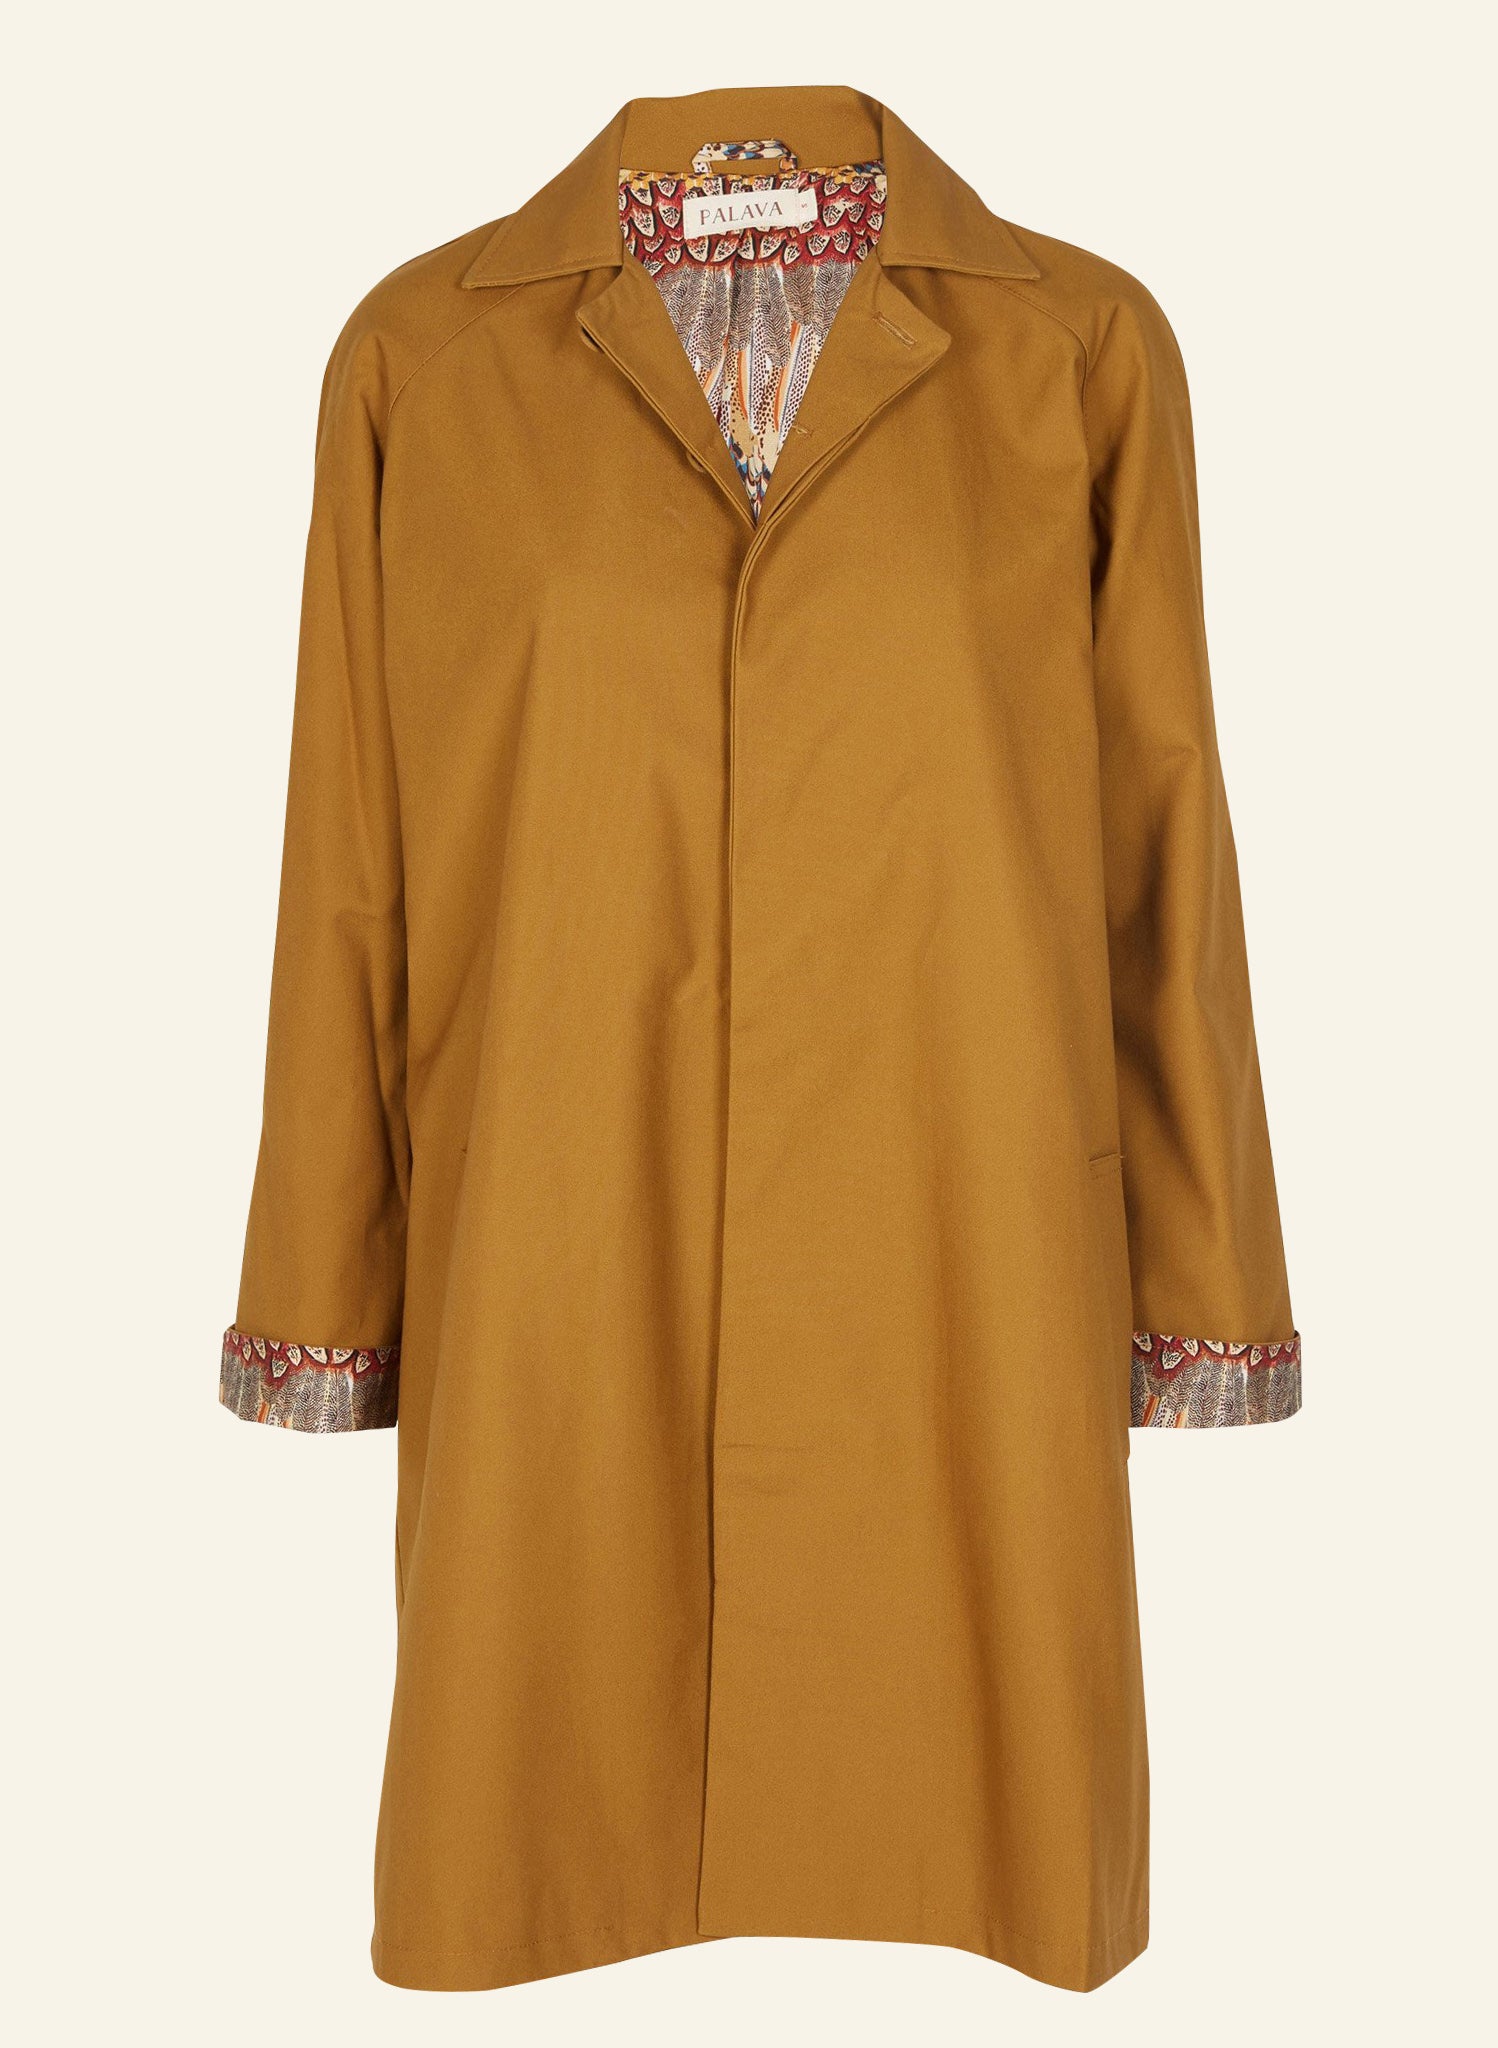 Trenchcoat - Toffee | Ruffled Feathers Print